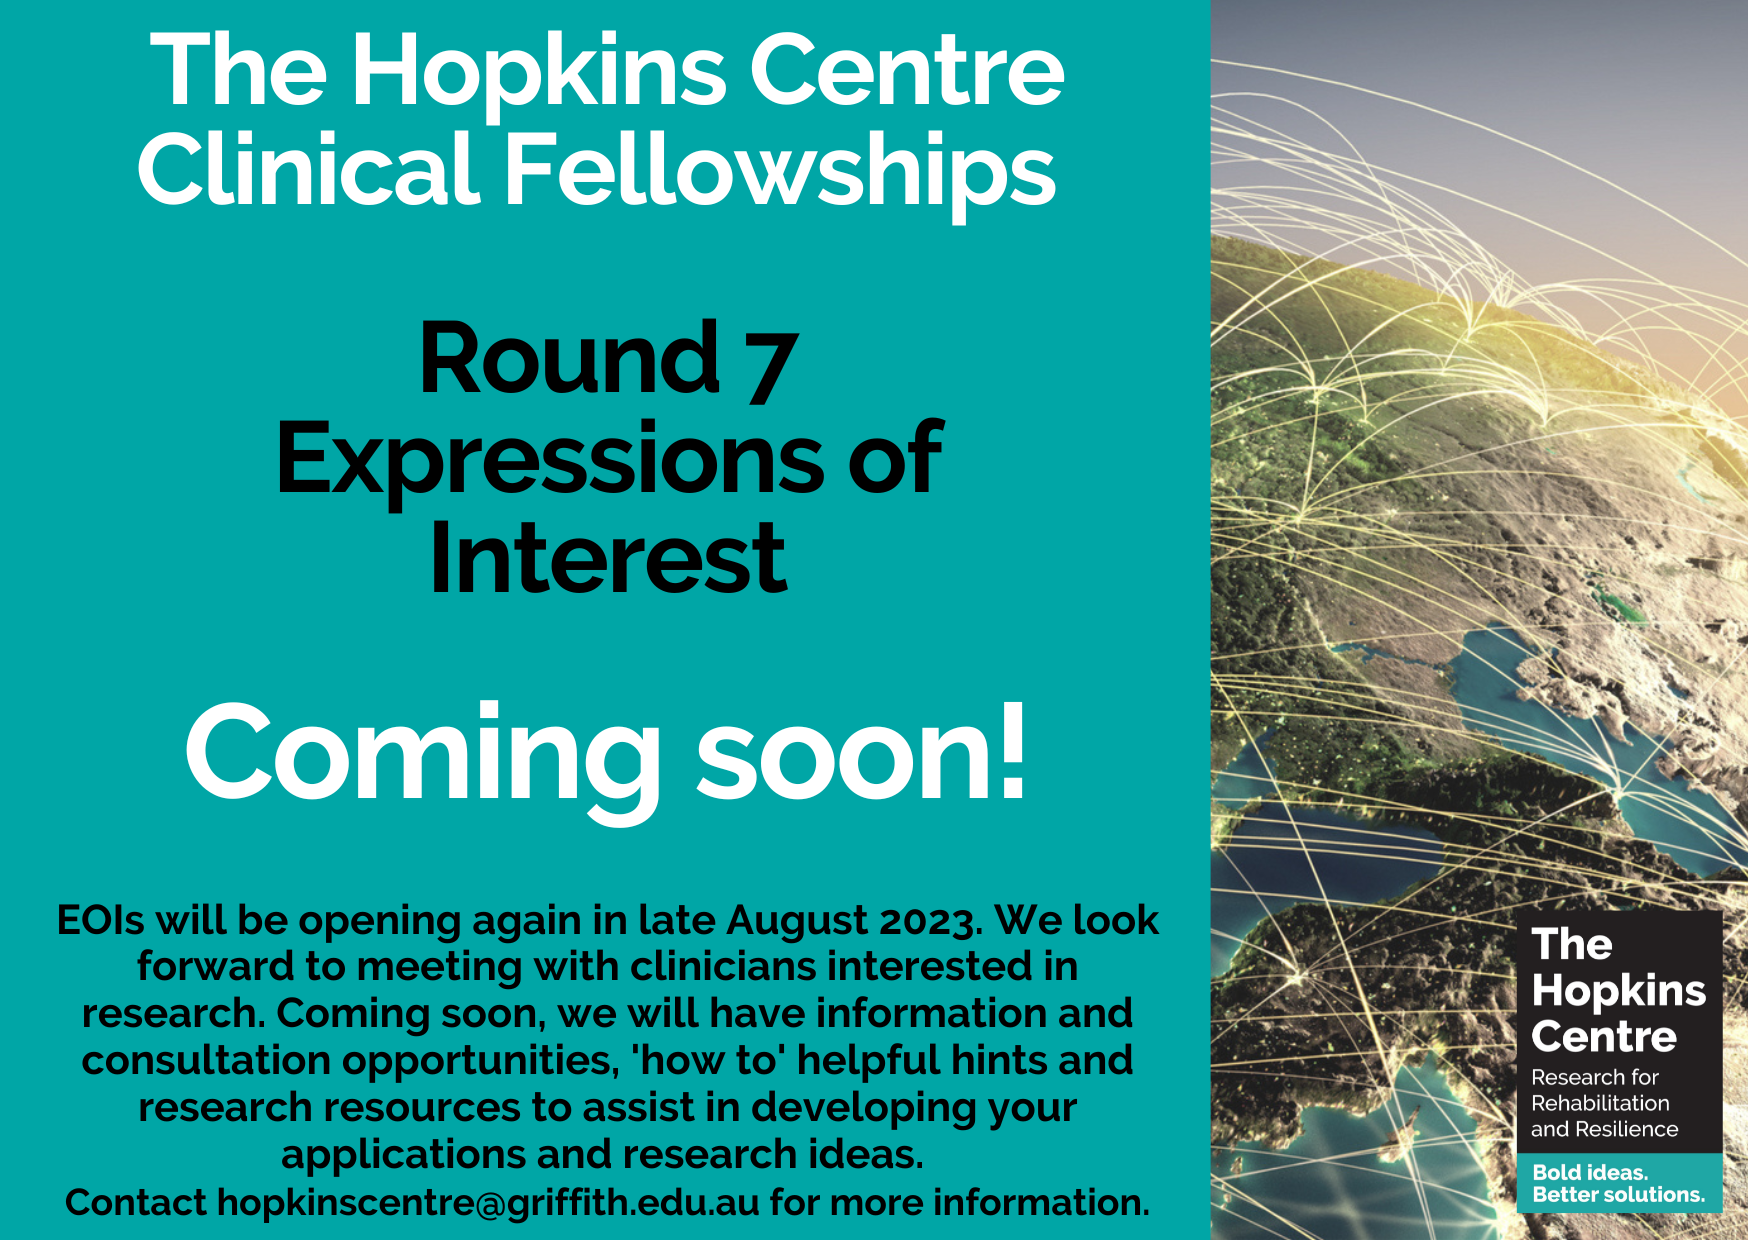 A flyer divided vertically into 2 sections: the left 3/4 is a turquoise background; the right 1-4 shows an image of the earth with golden lines arcing between continents. On top of the turquoise background is a bolded white title "The Hopkins Centre Clinical Fellowships" at the top and "Coming Soon!" in the middle. In between the white text is black text reading "Round 7 Expressions of interest" and the text "coming soon!" underneath in white. At the bottom, there is smaller black text with some more information about the EOIs opening in late August. 